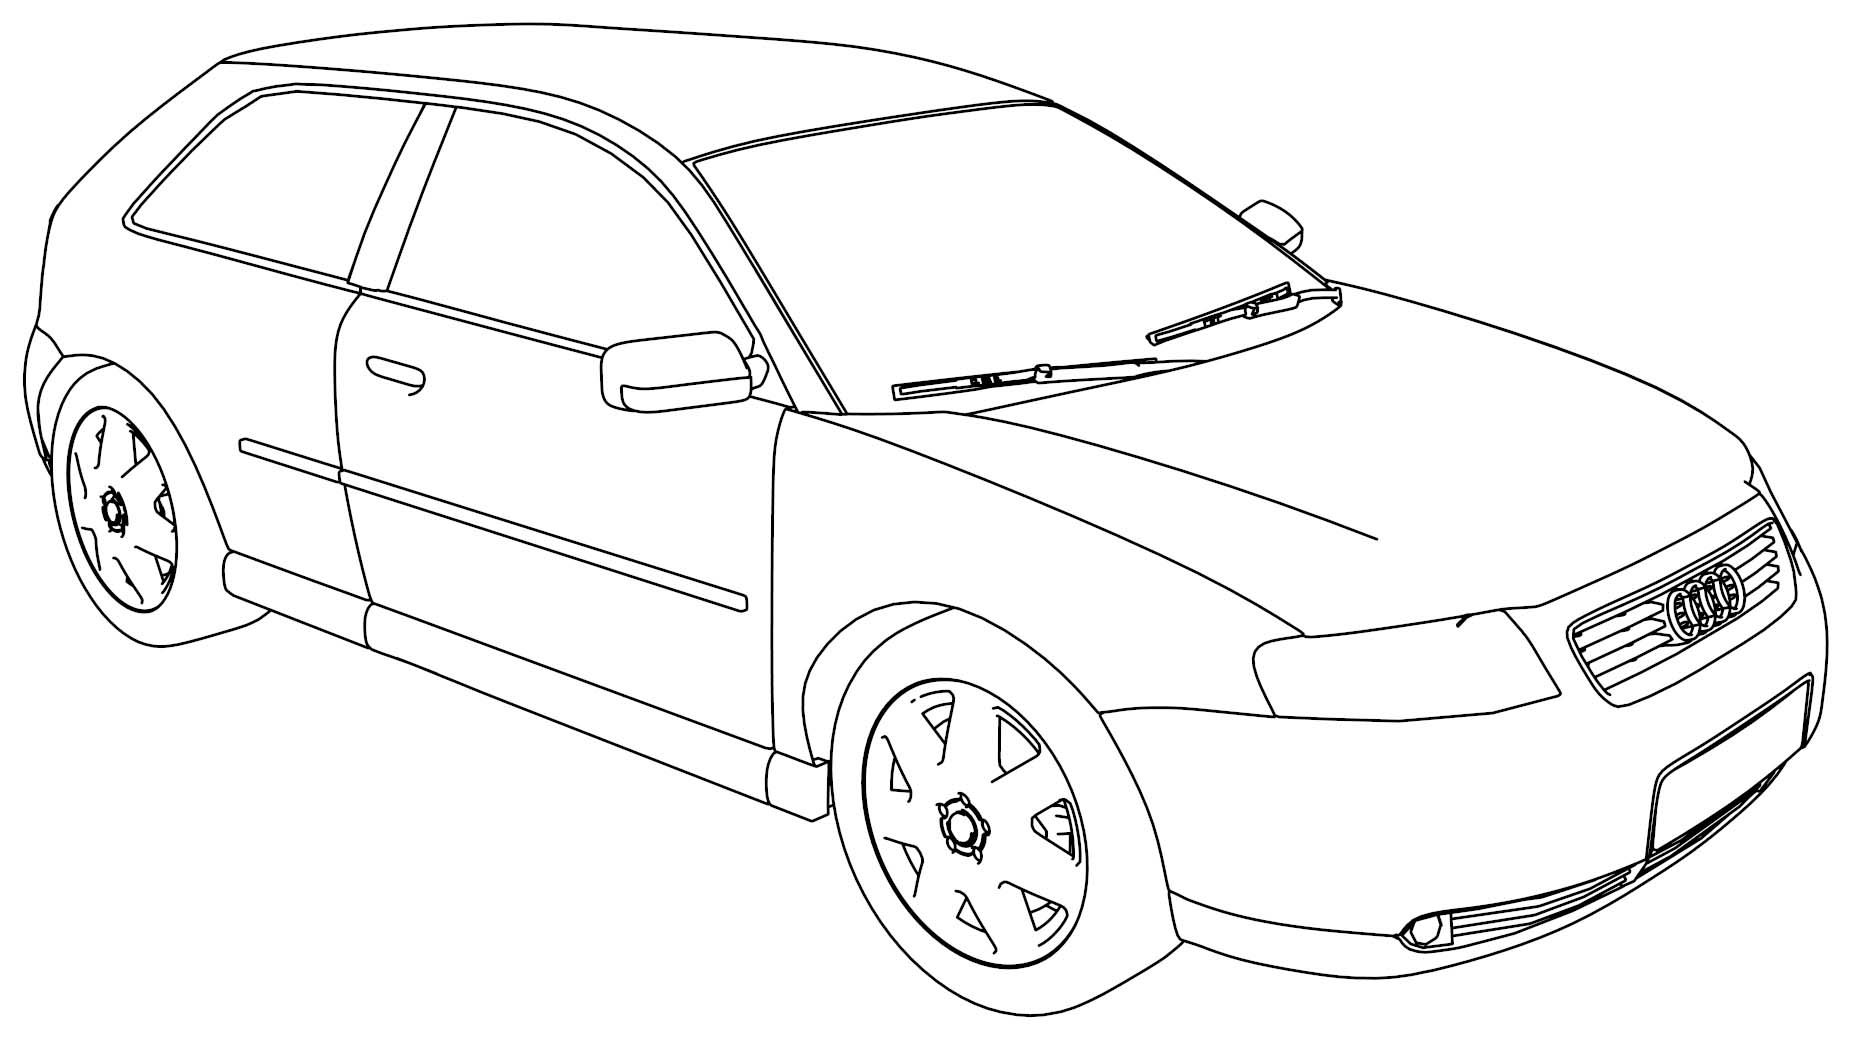 awesome Audi A3 Coloring Page | Audi a3, Coloring pages, Audi